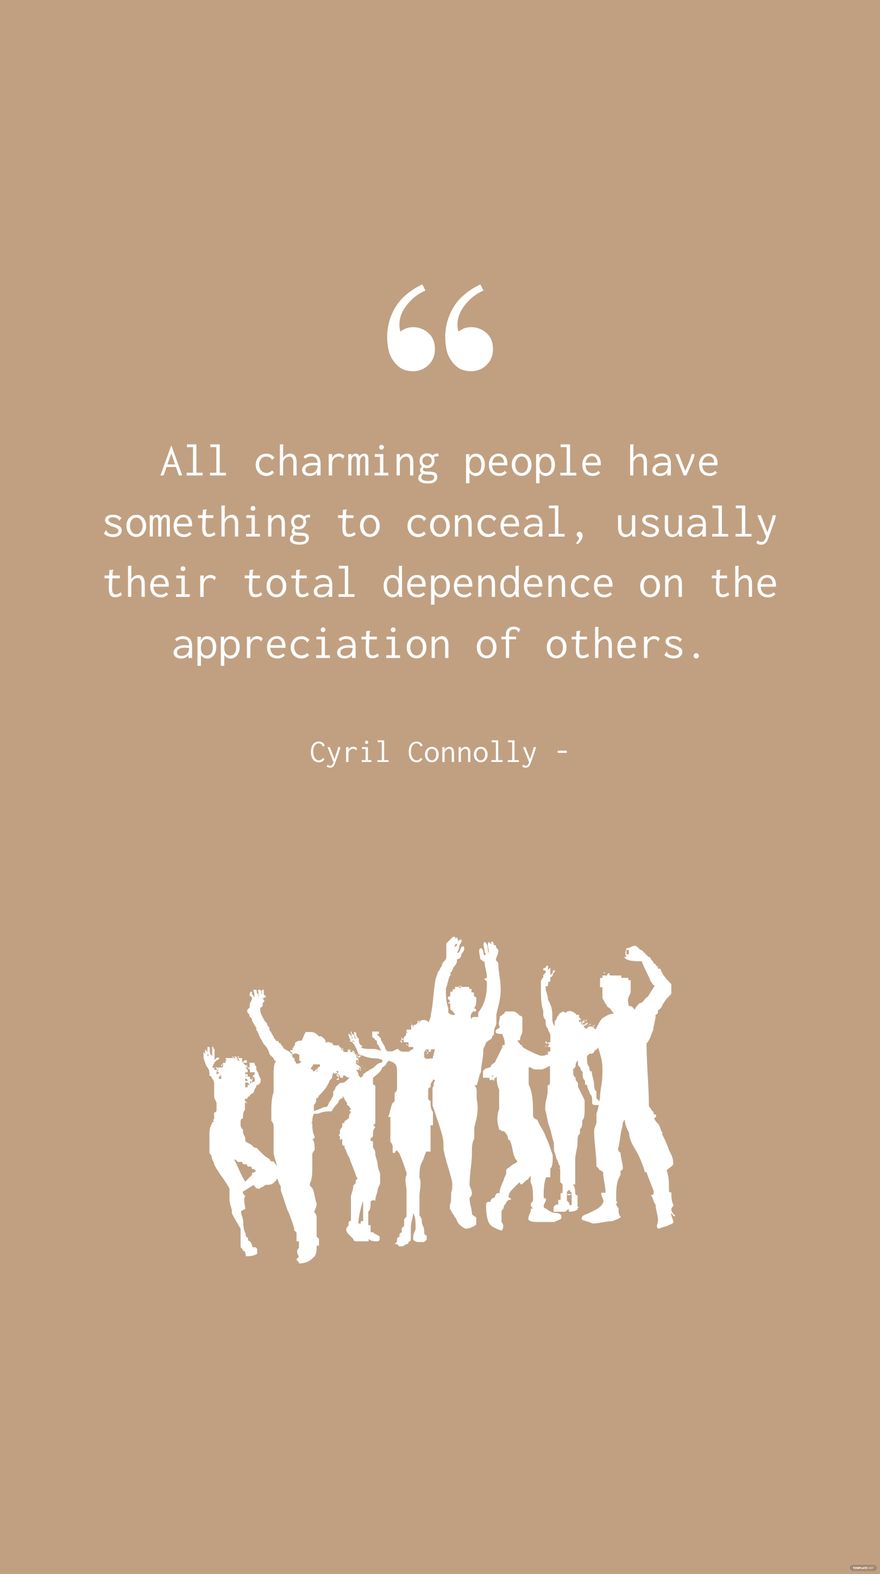 Free Cyril Connolly - All charming people have something to conceal, usually their total dependence on the appreciation of others. in JPG